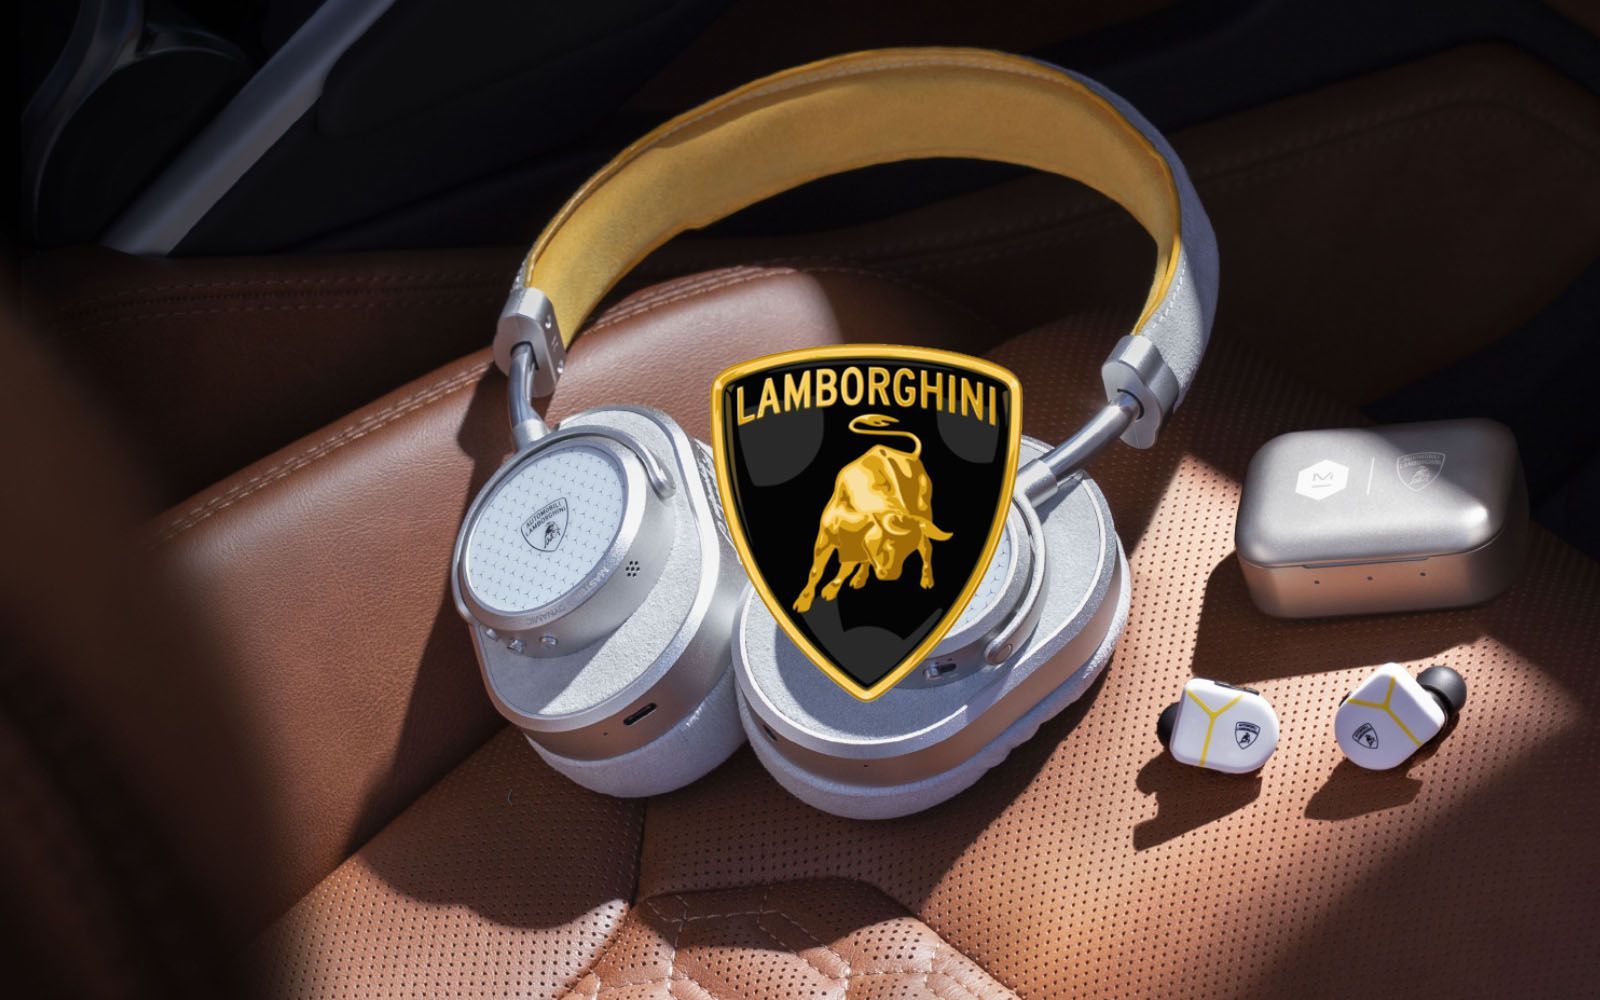 The new Lamborghini headphones in collaboration with Master & Dynamic